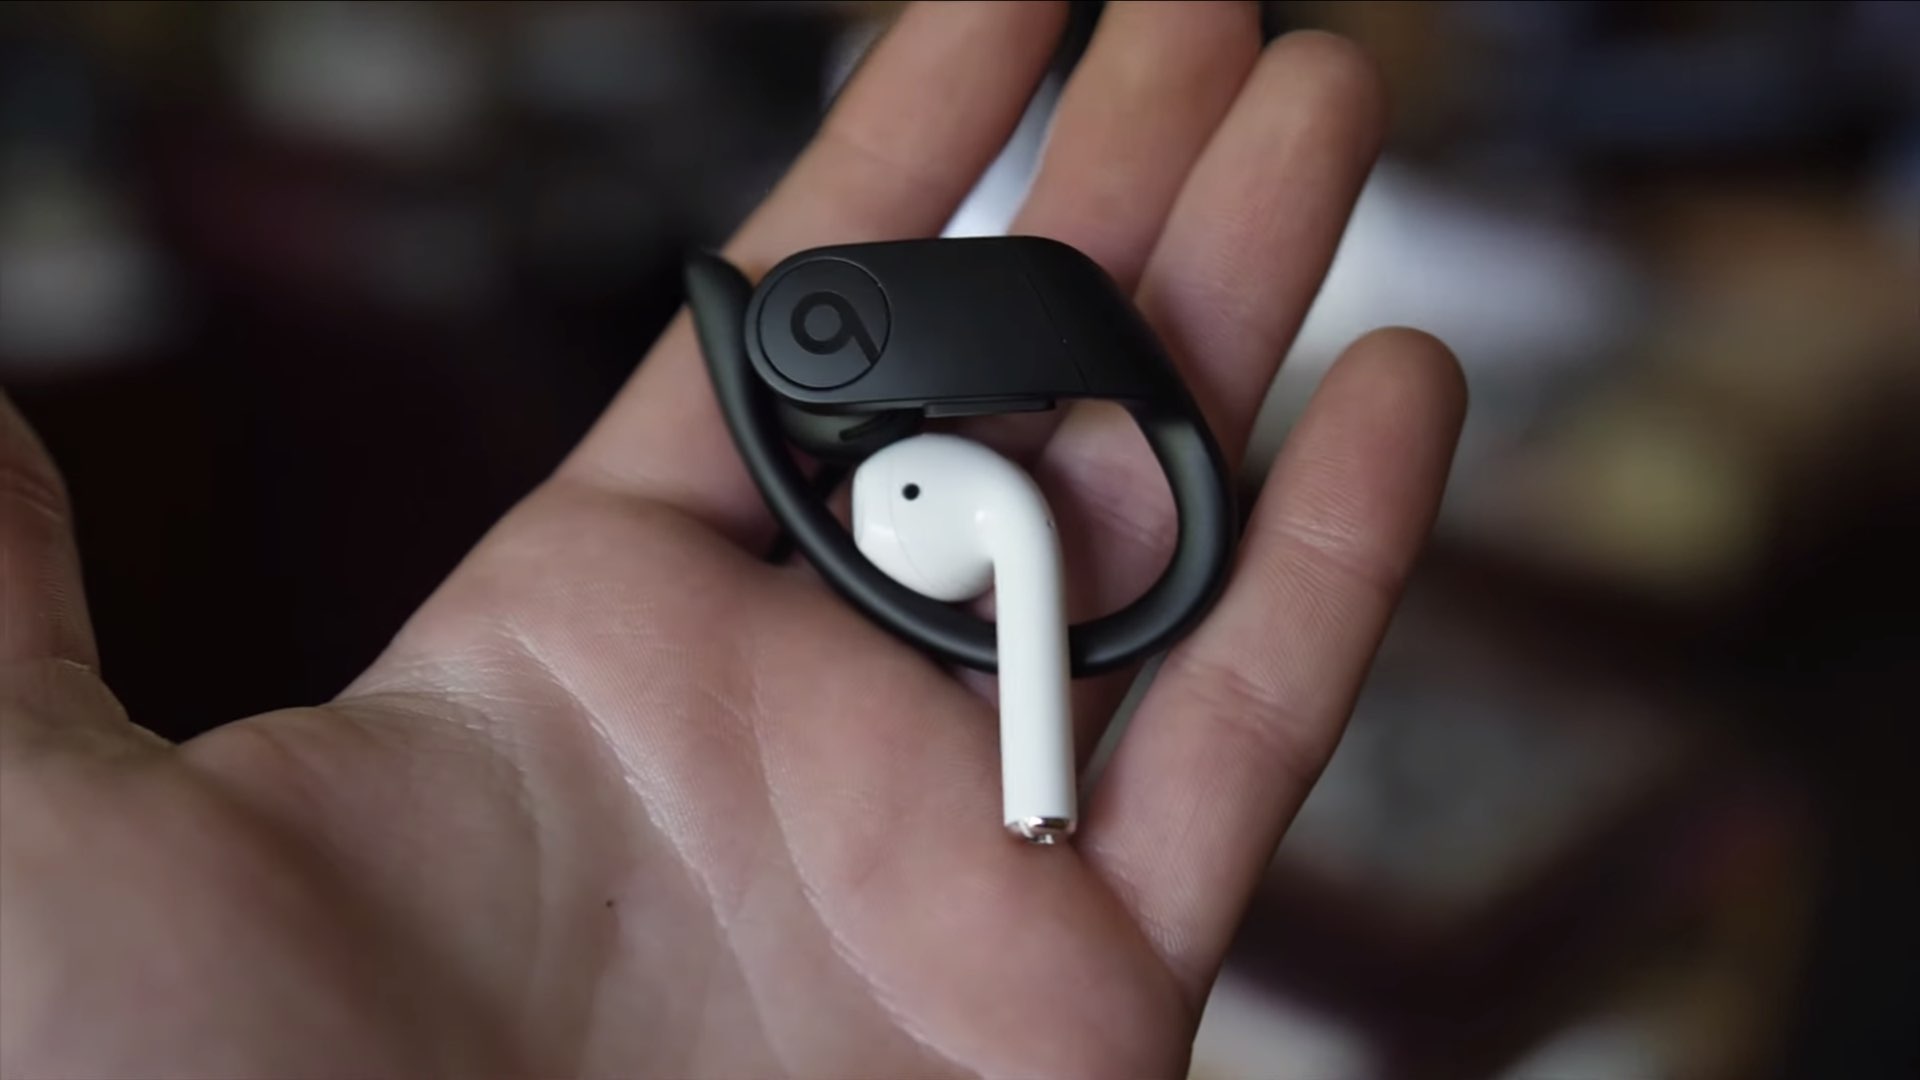 iOS 13.2 features tutorial: second-generation AirPods and Powerbeats Pro